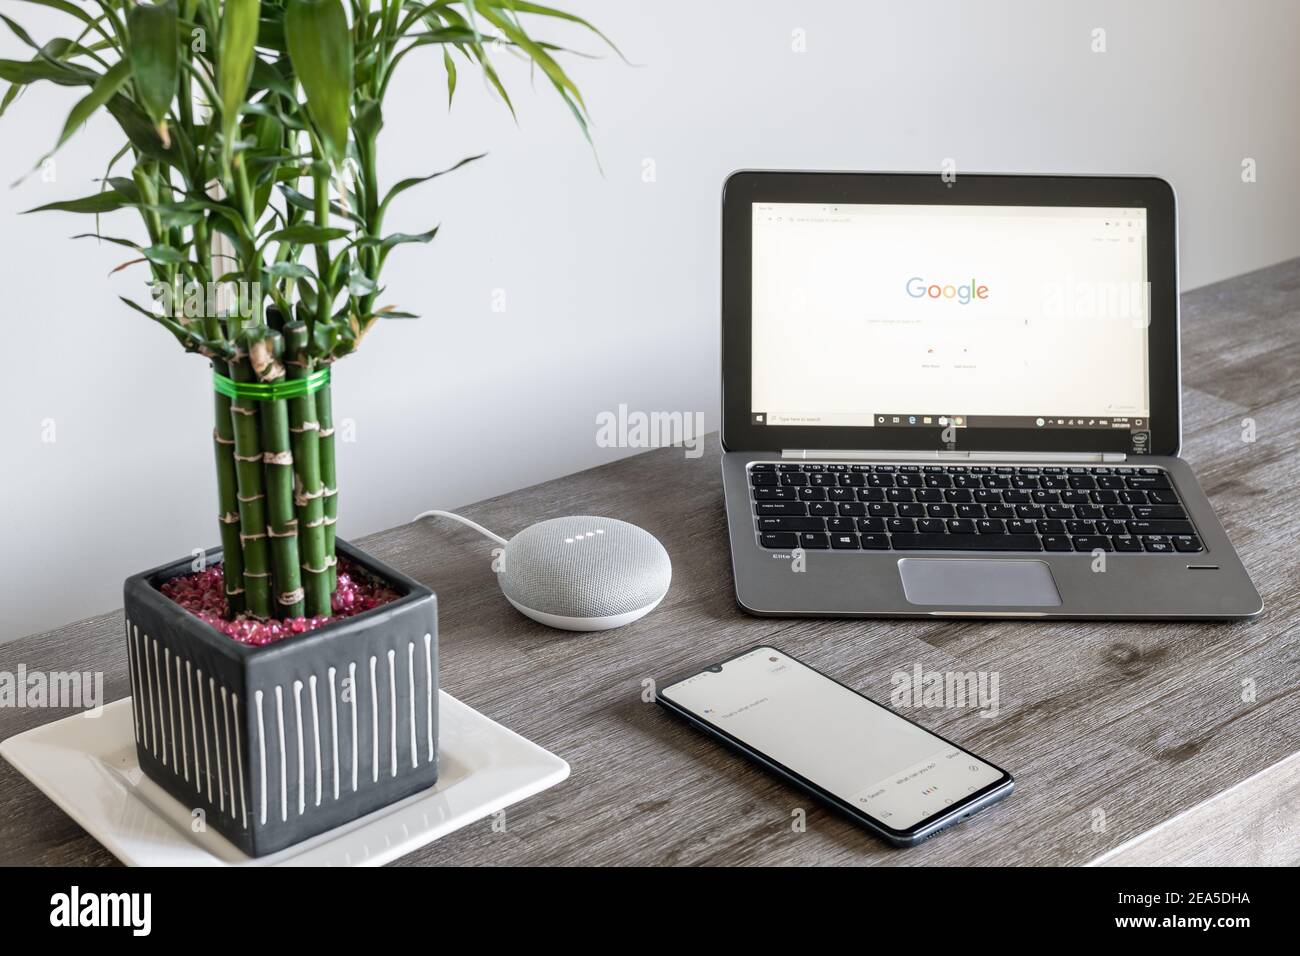 Adelaide, Australia - July 7, 2019: Google Home Mini with HP laptop running  Windows 10 and mobile phone set up on table next to each other Stock Photo  - Alamy